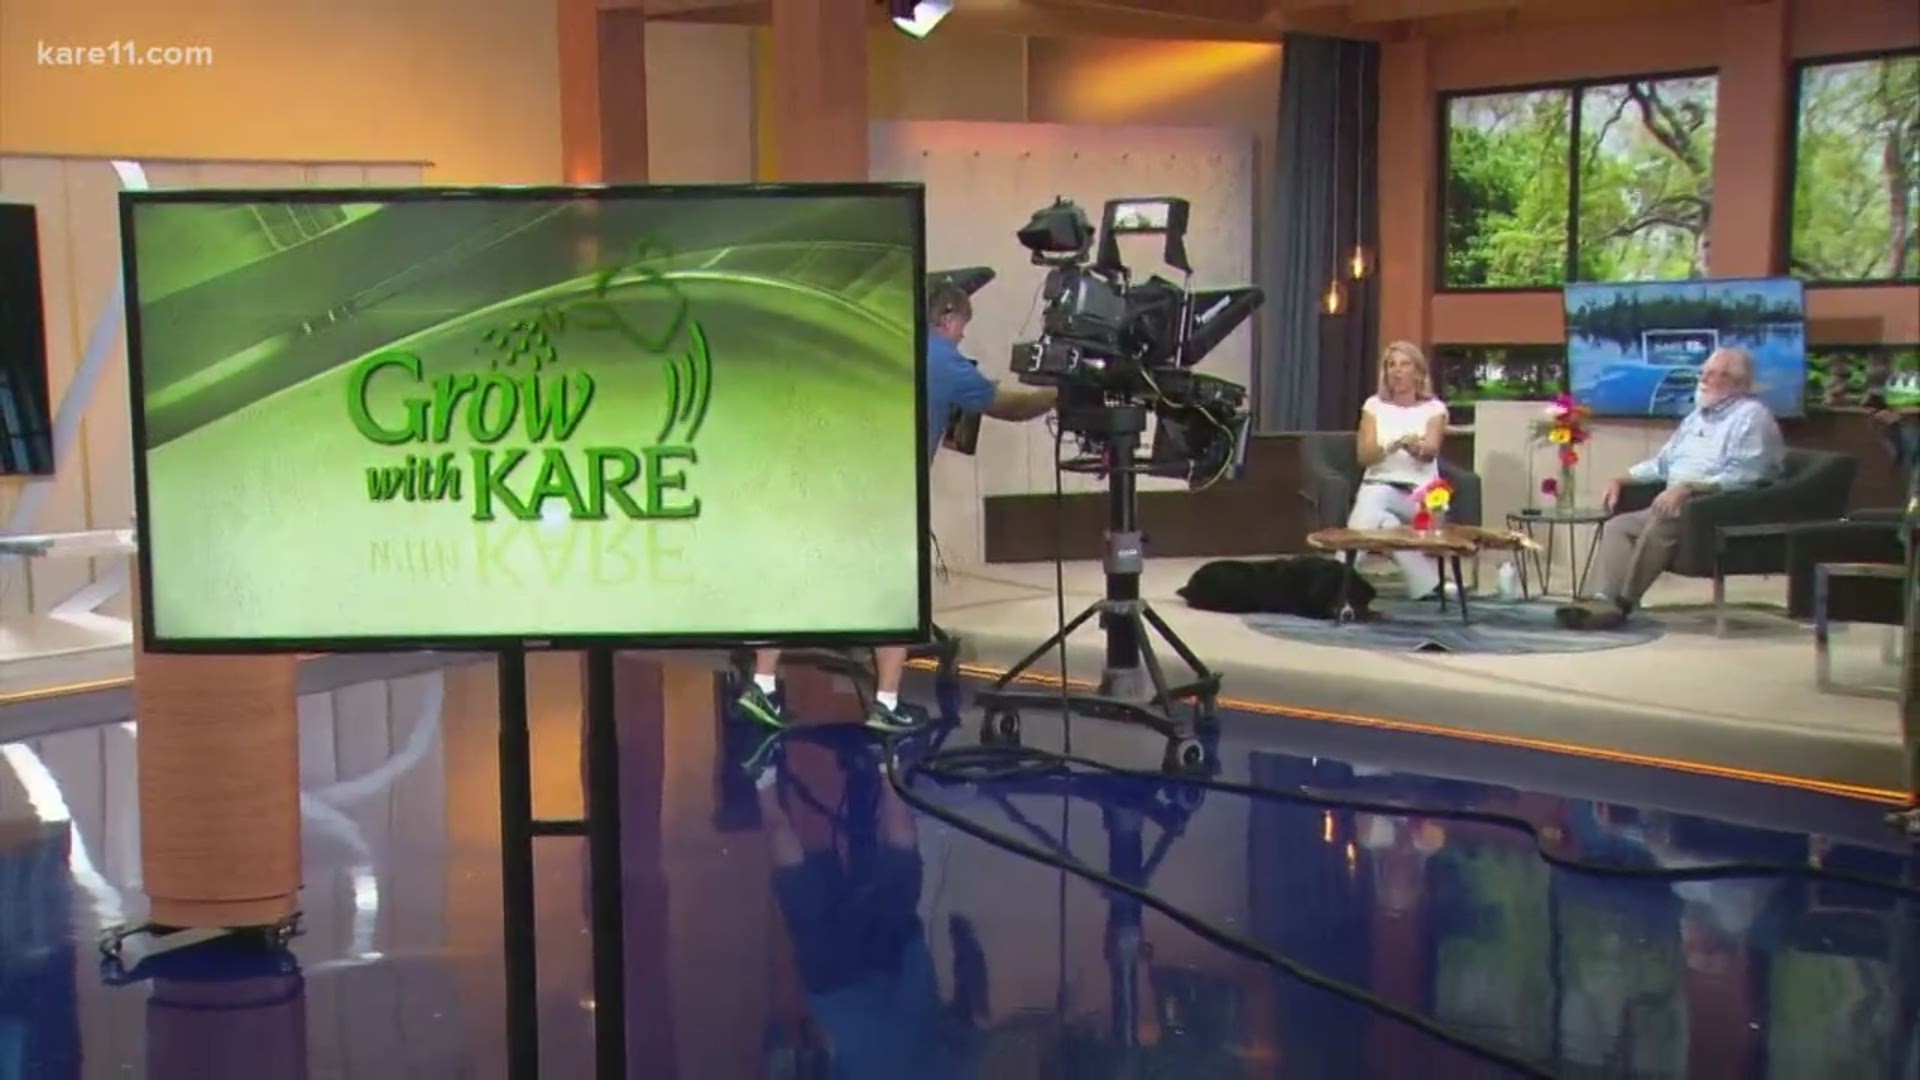 We tackle your latest social media questions on our August 10 Grow with KARE Q&A segment.